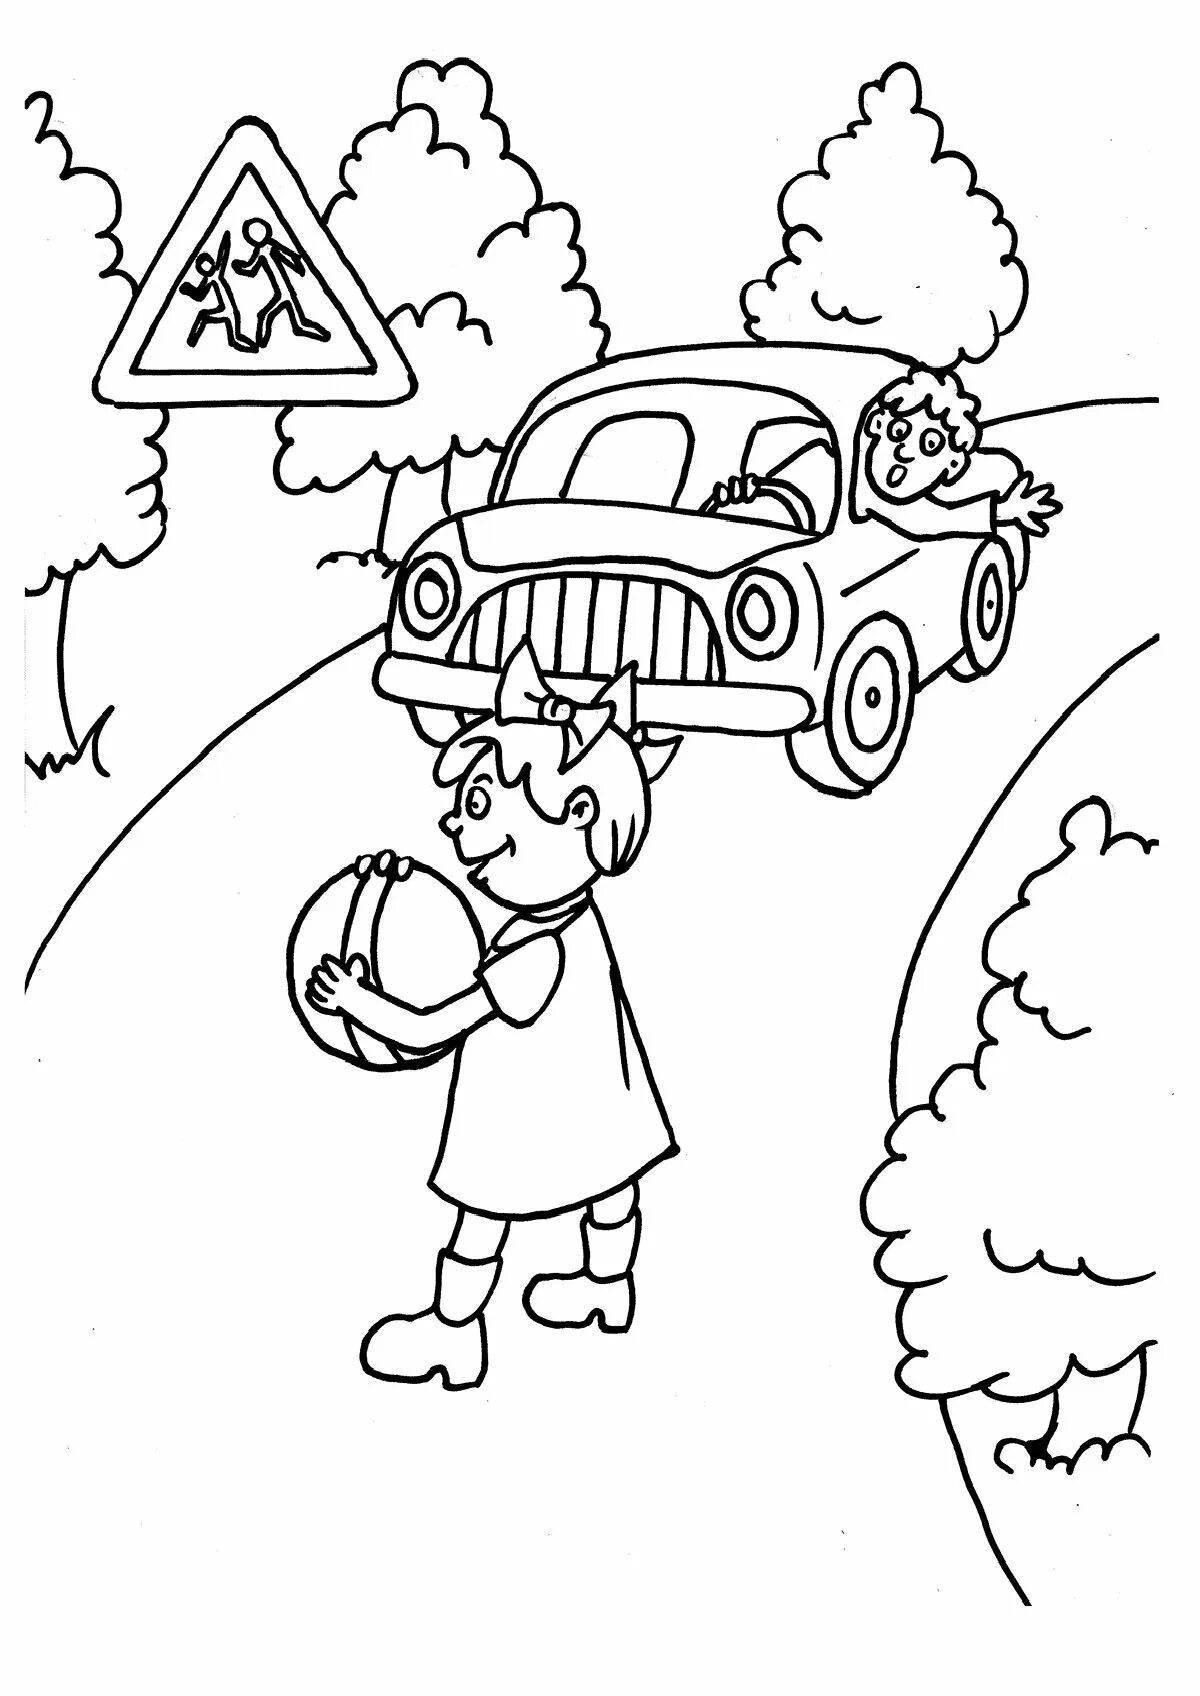 Drawings for kids traffic rules for kids #2